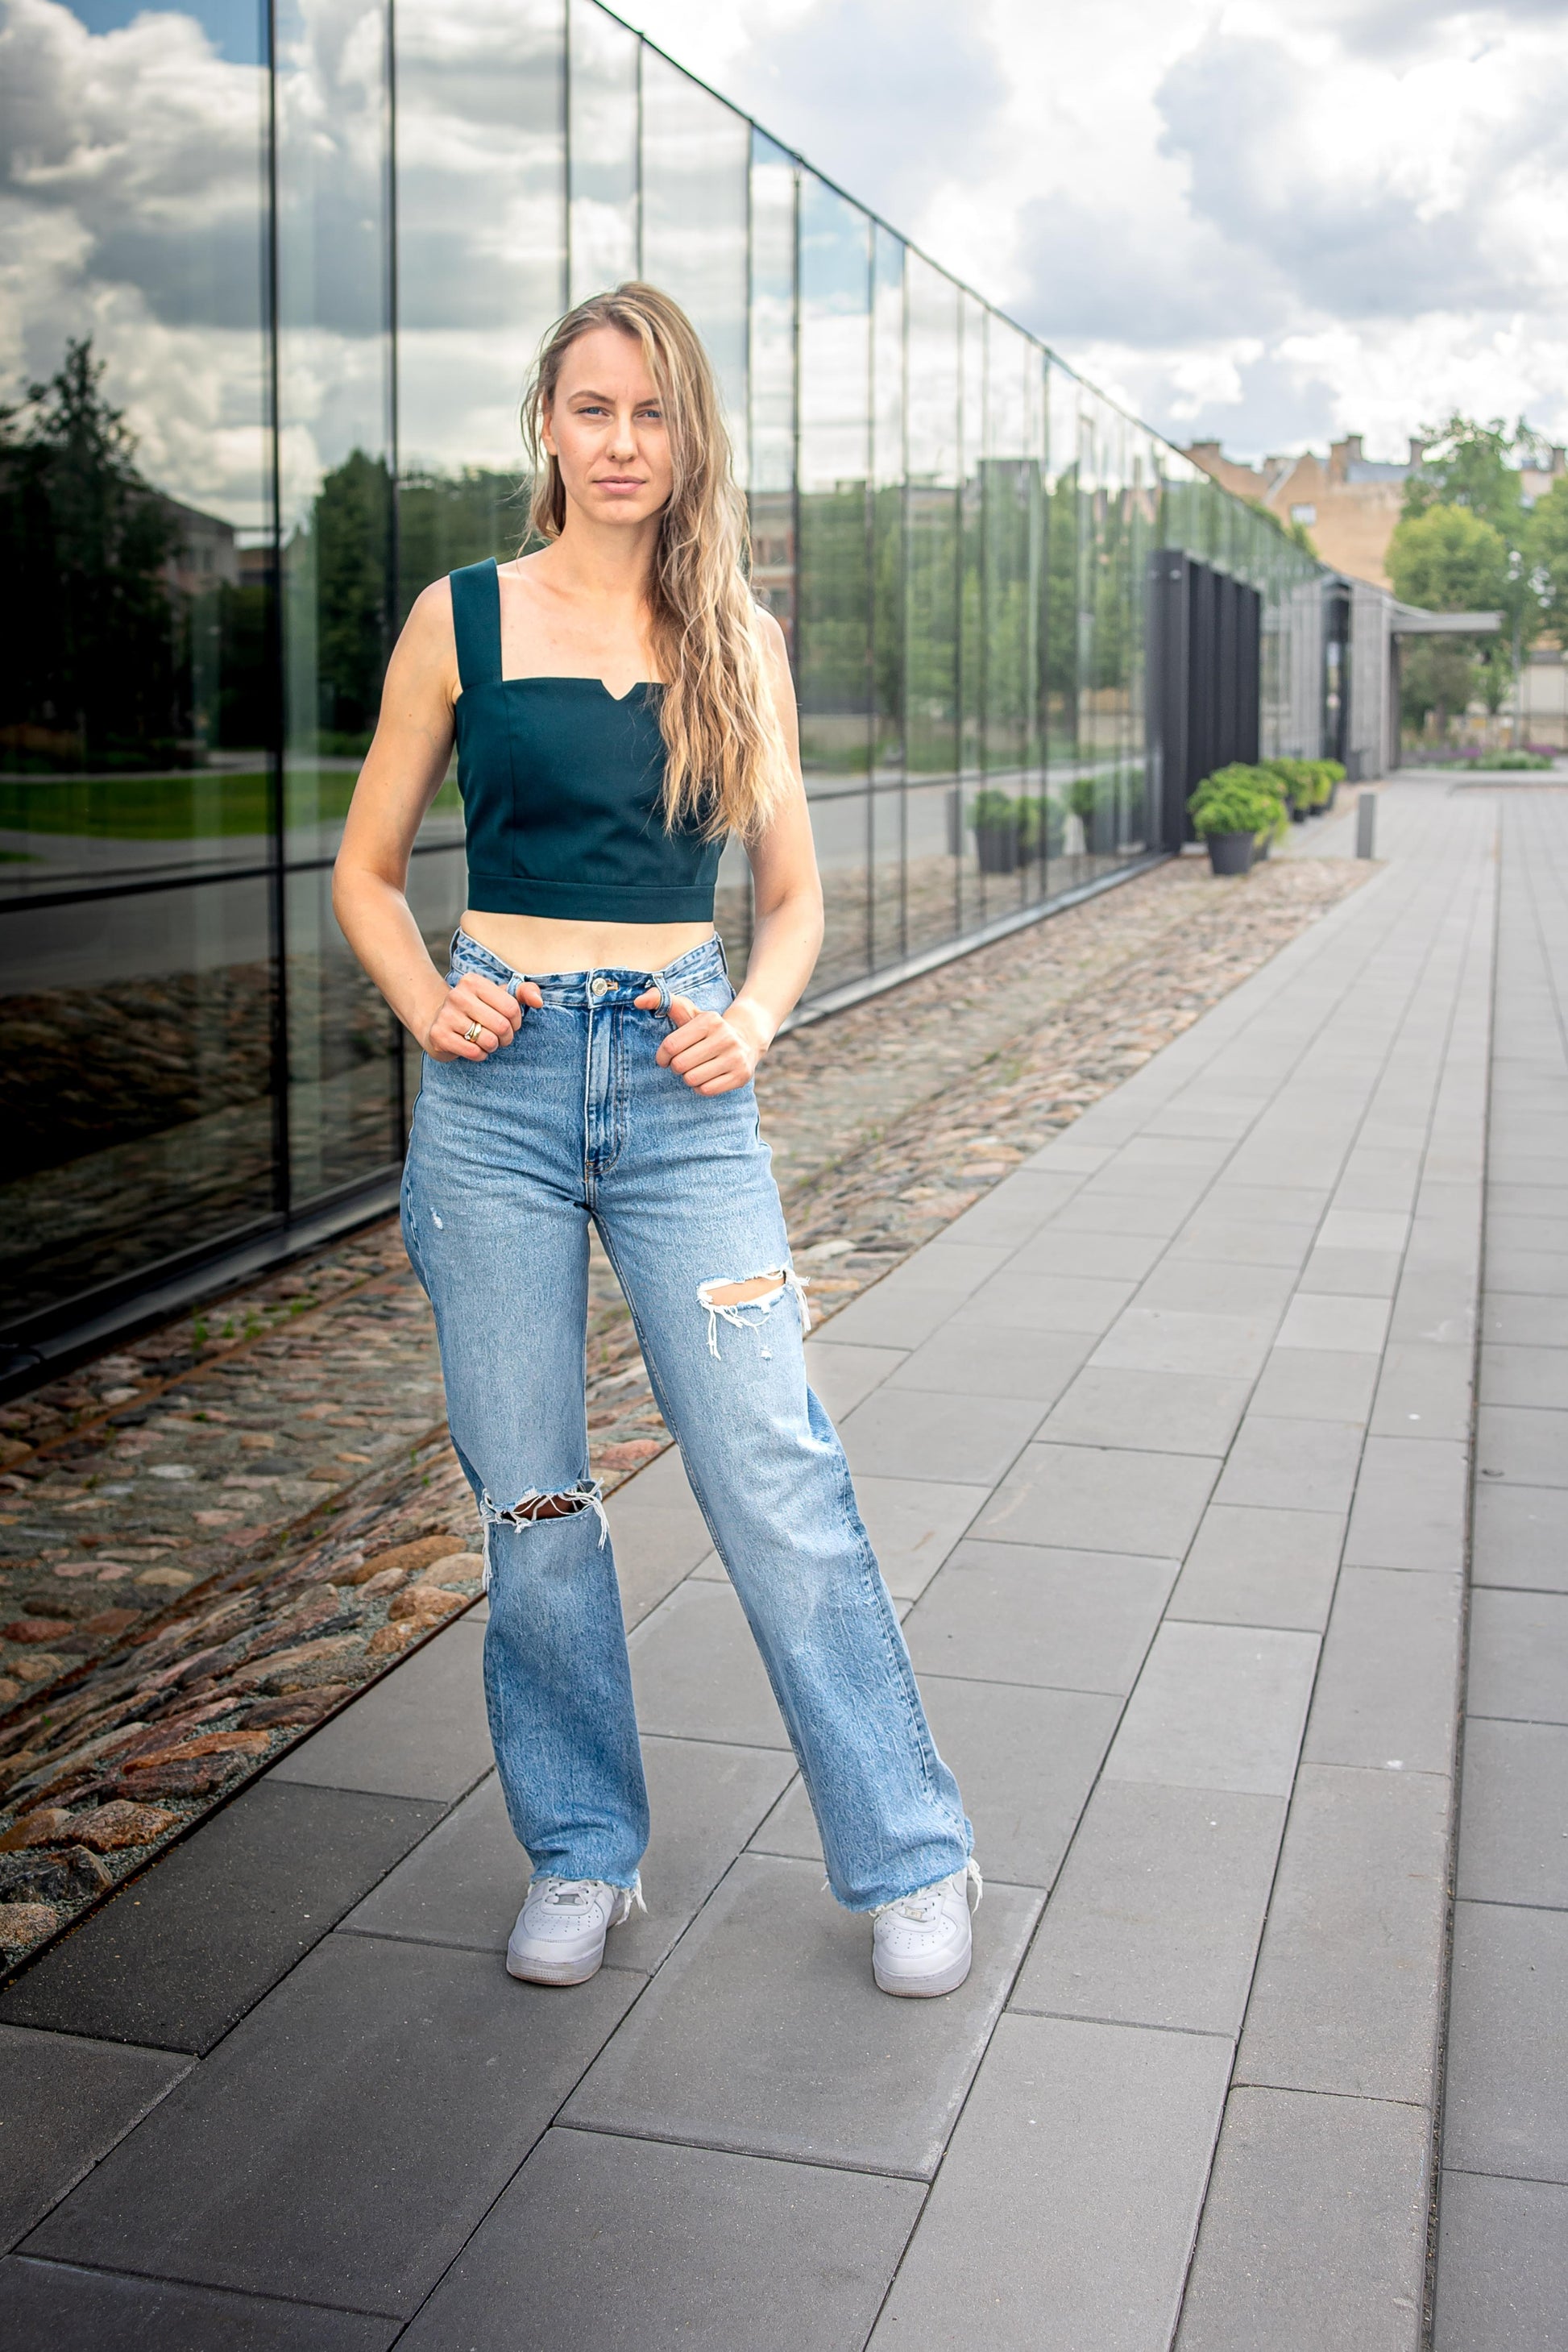 blonde woman on a sunny day in en emerald green corset top, paired with jeans and white sneakers